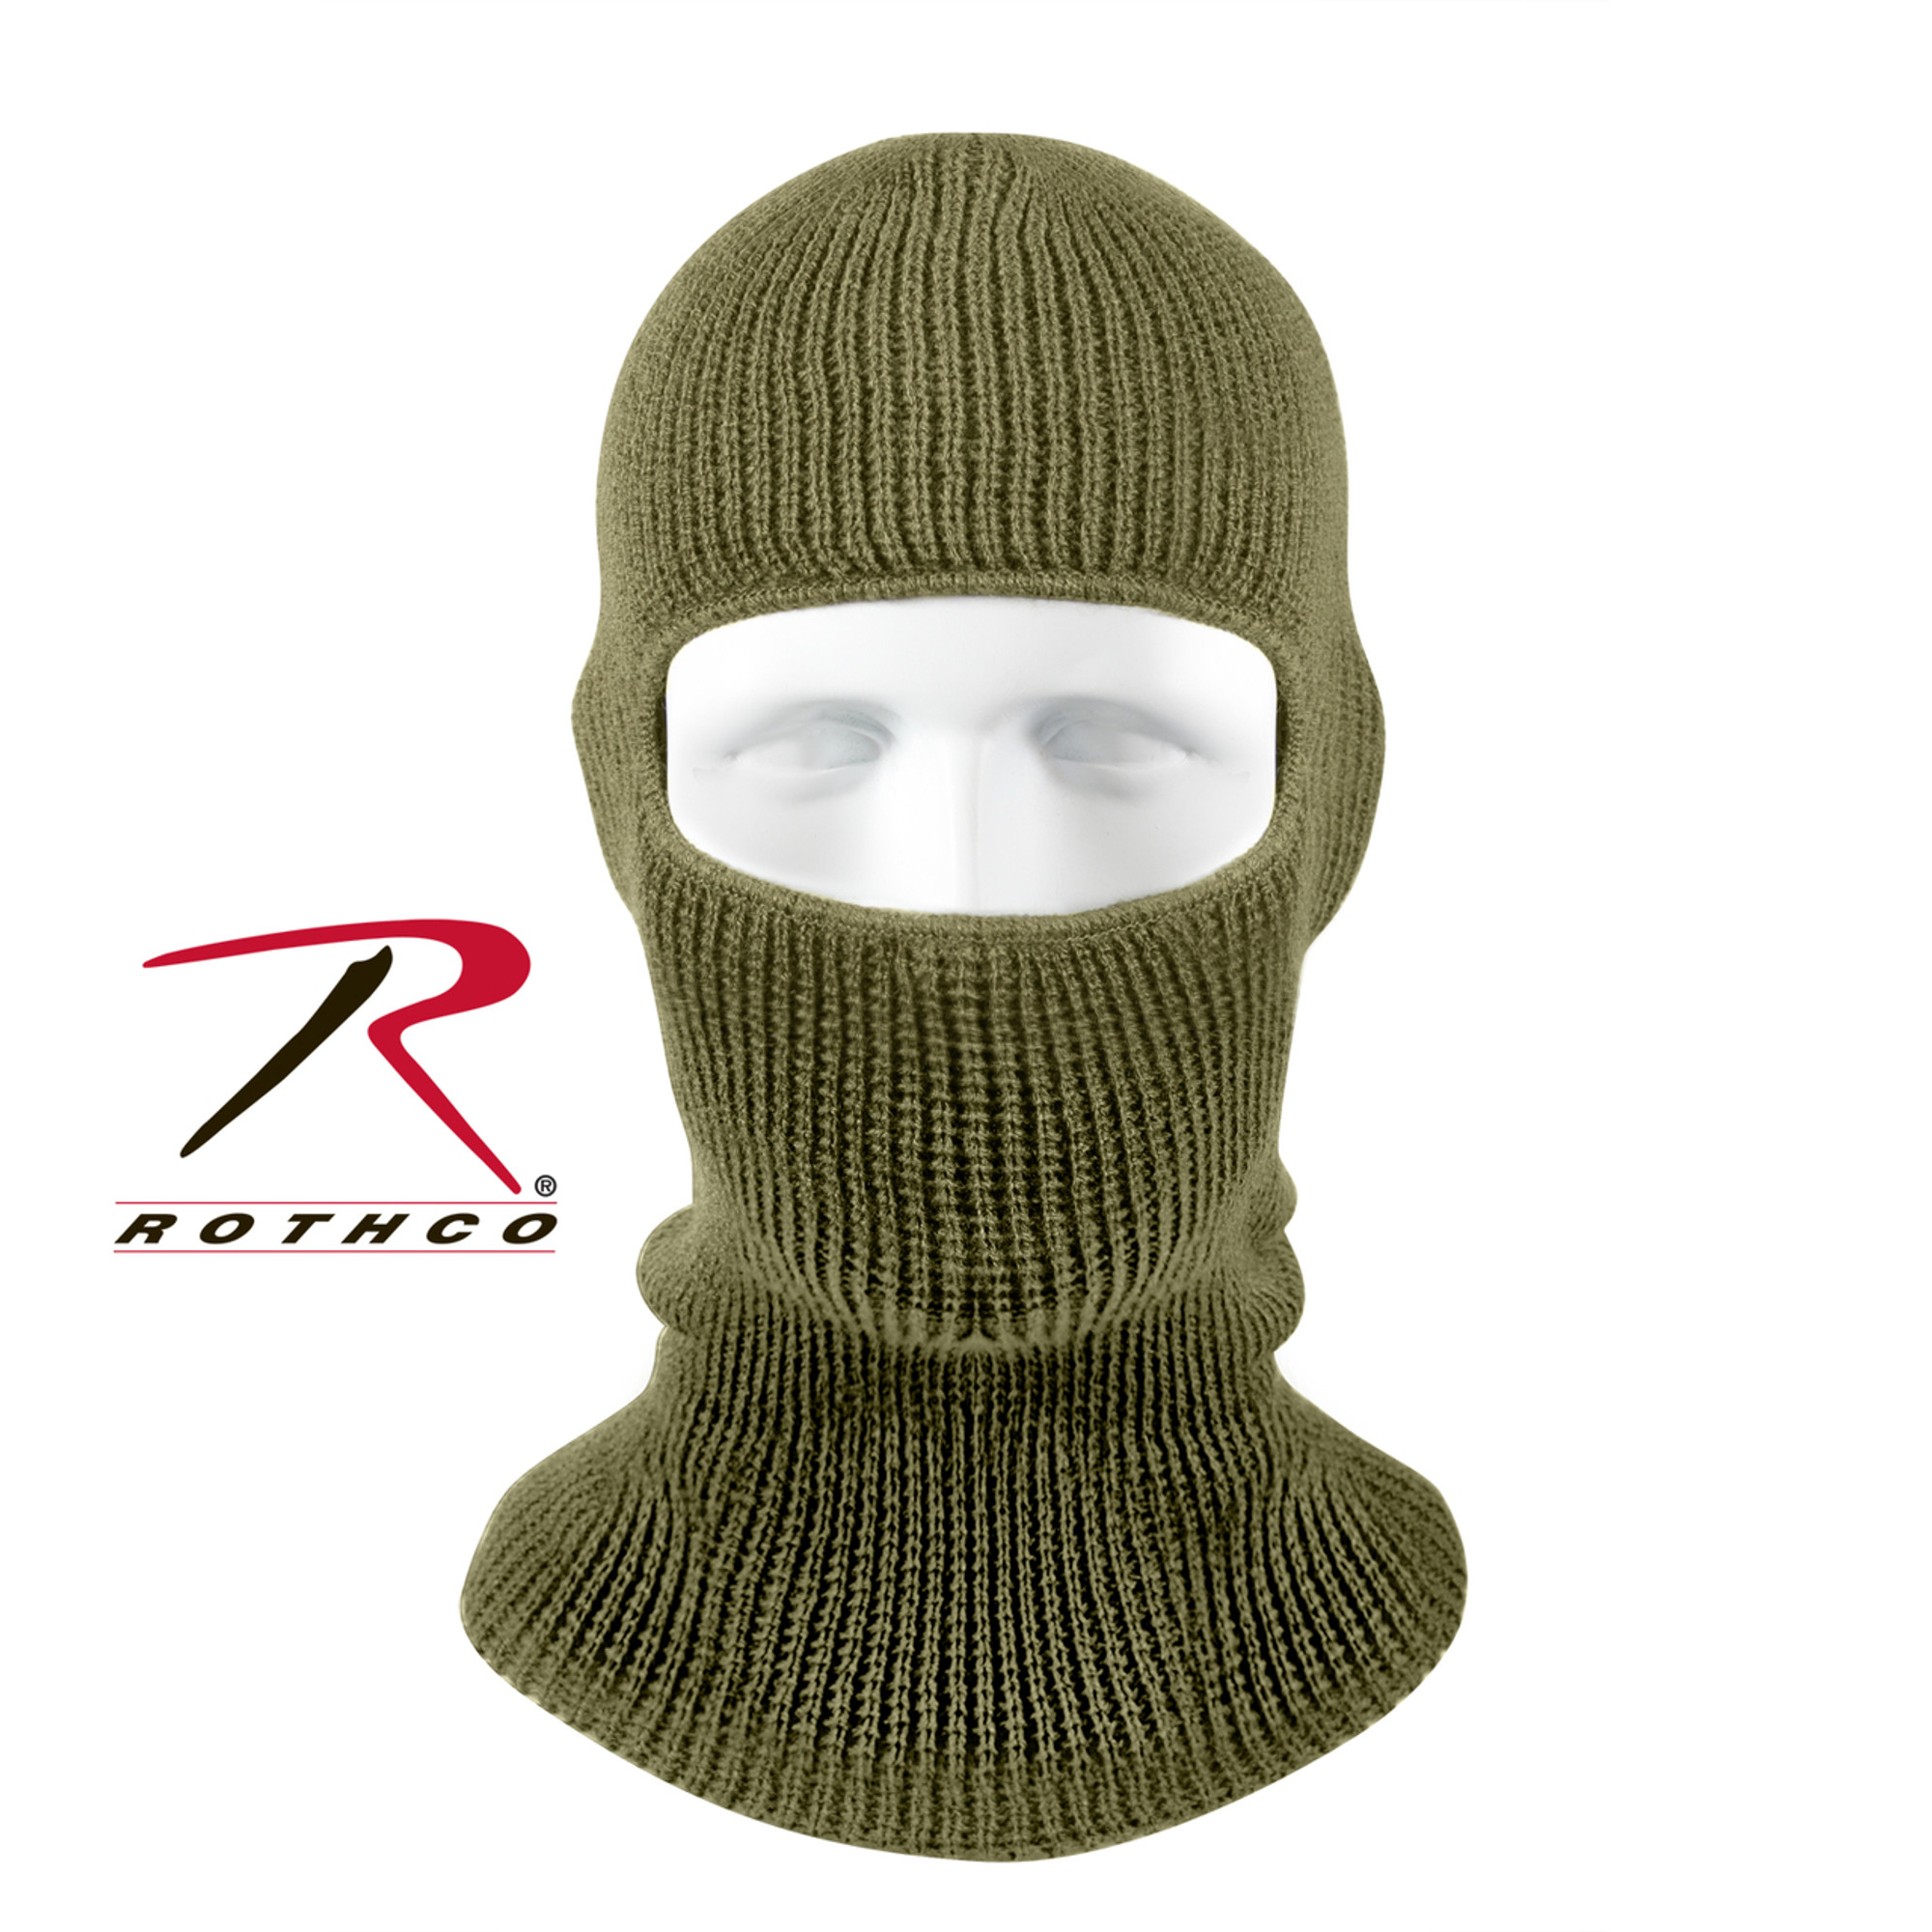 Rothco One-Hole Face Mask - Olive Drab